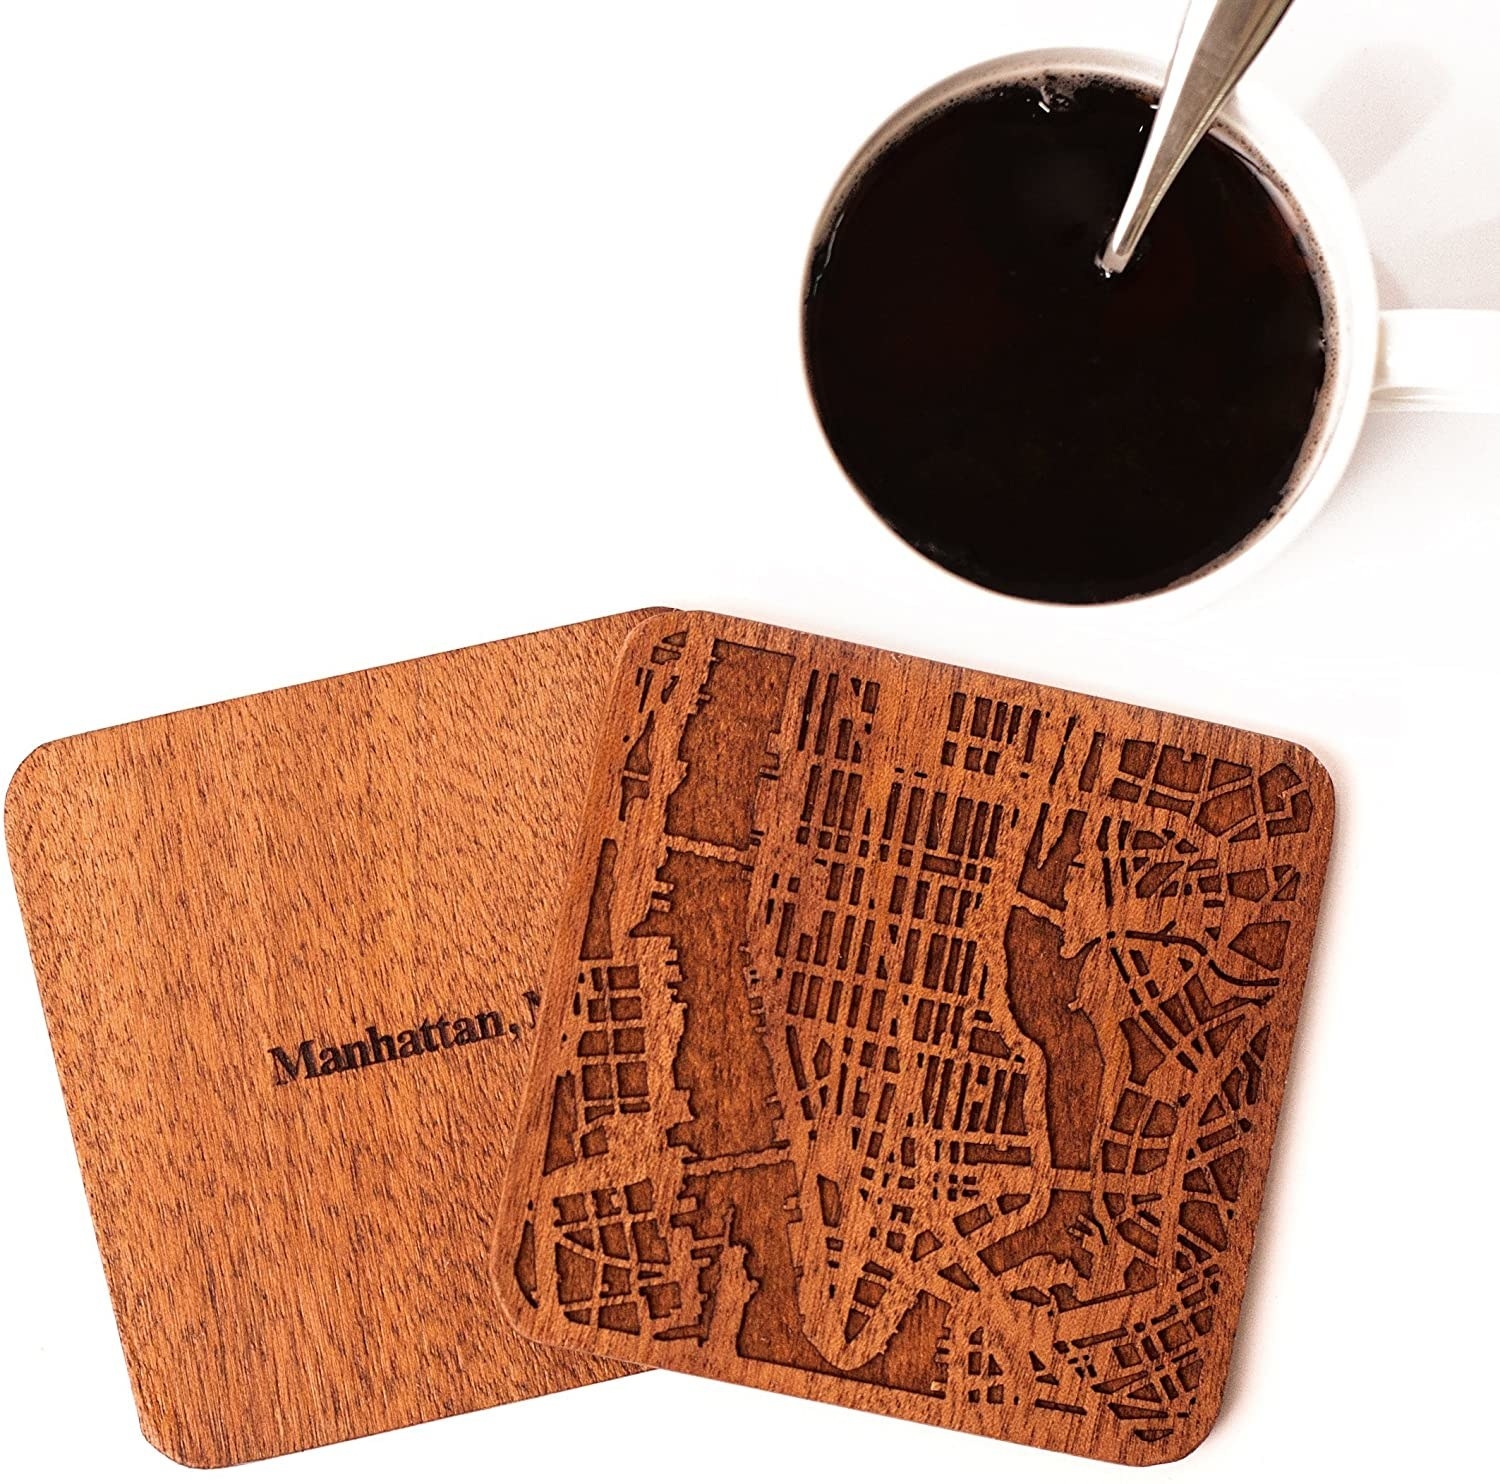 Brown Manhattan coasters sit beside a white cup of coffee